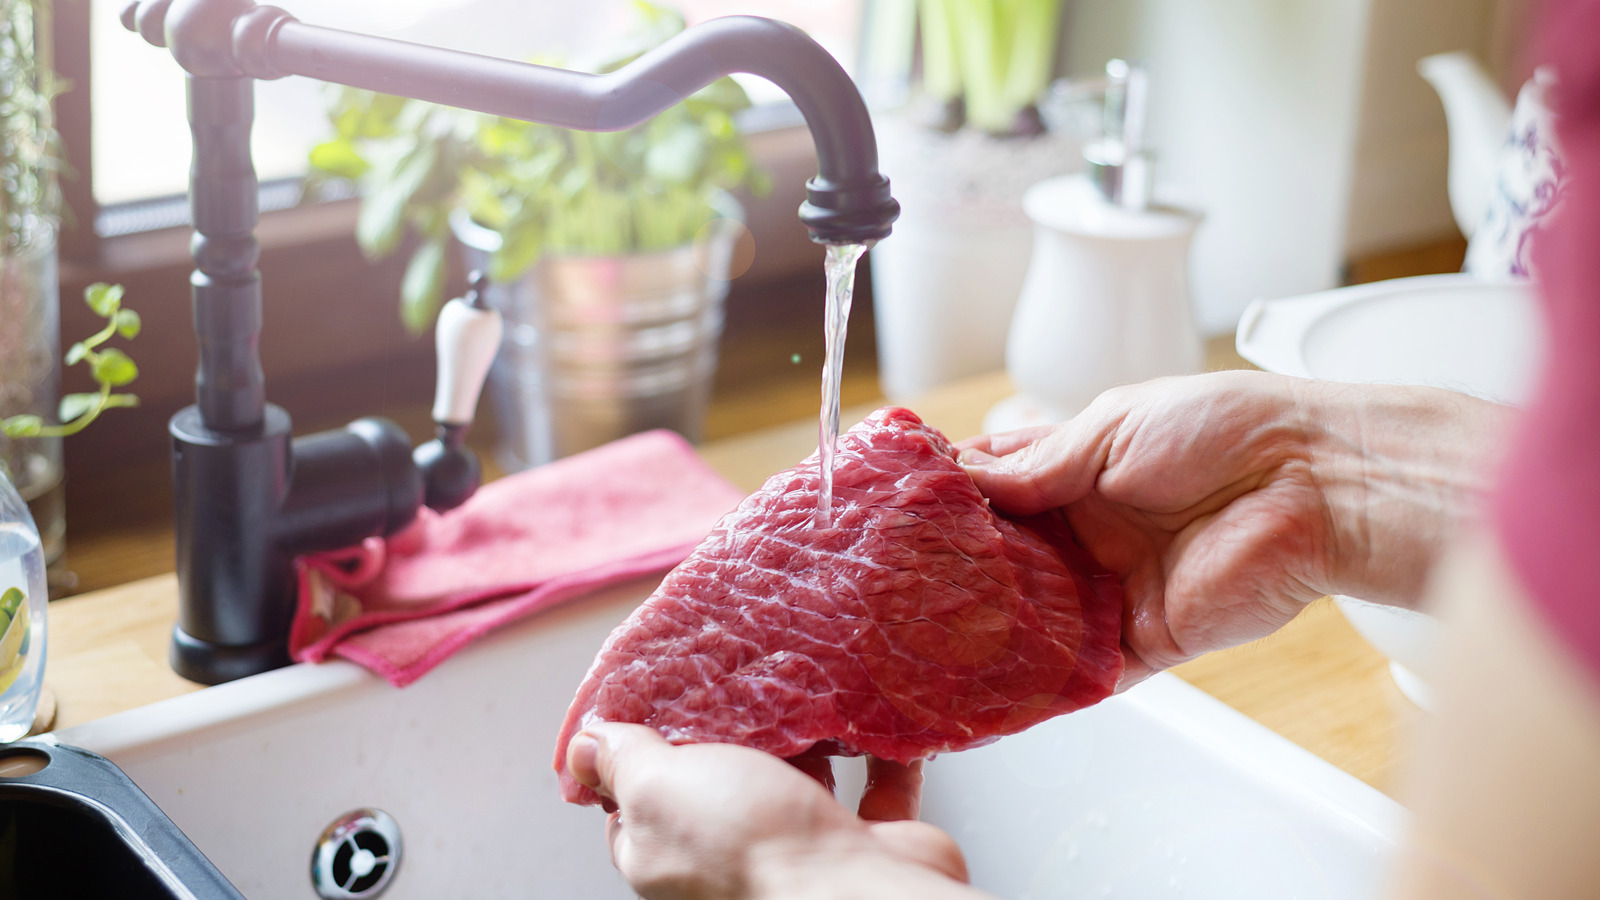 Should you rinse your meats before cooking or freezing? | Food & Home Magazine